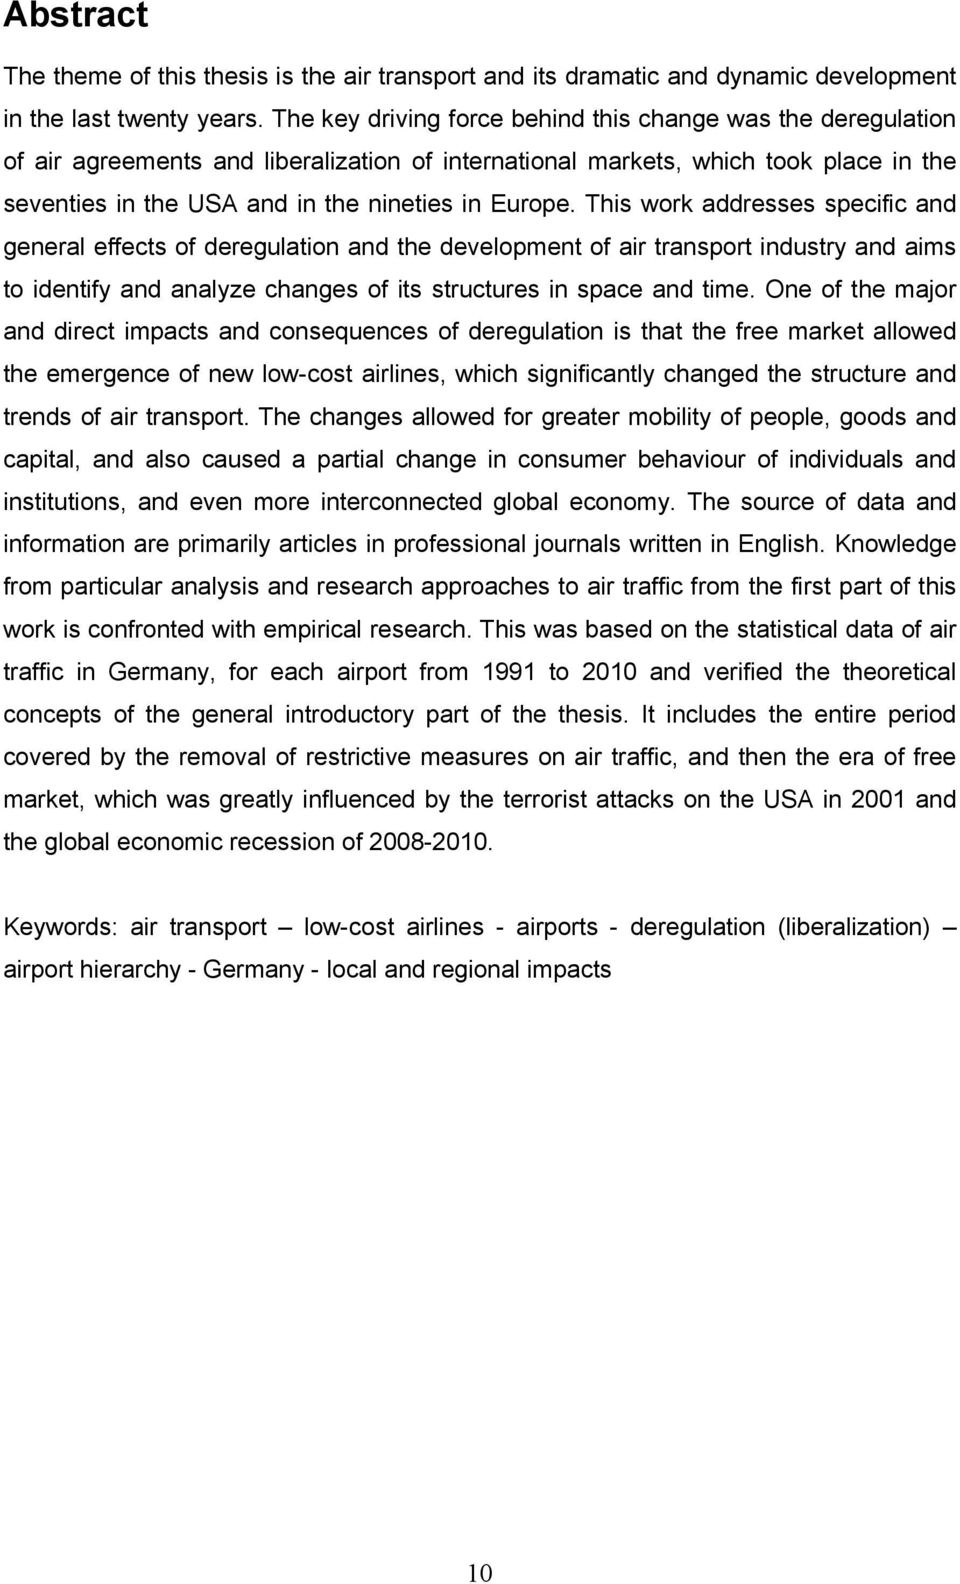 This work addresses specific and general effects of deregulation and the development of air transport industry and aims to identify and analyze changes of its structures in space and time.